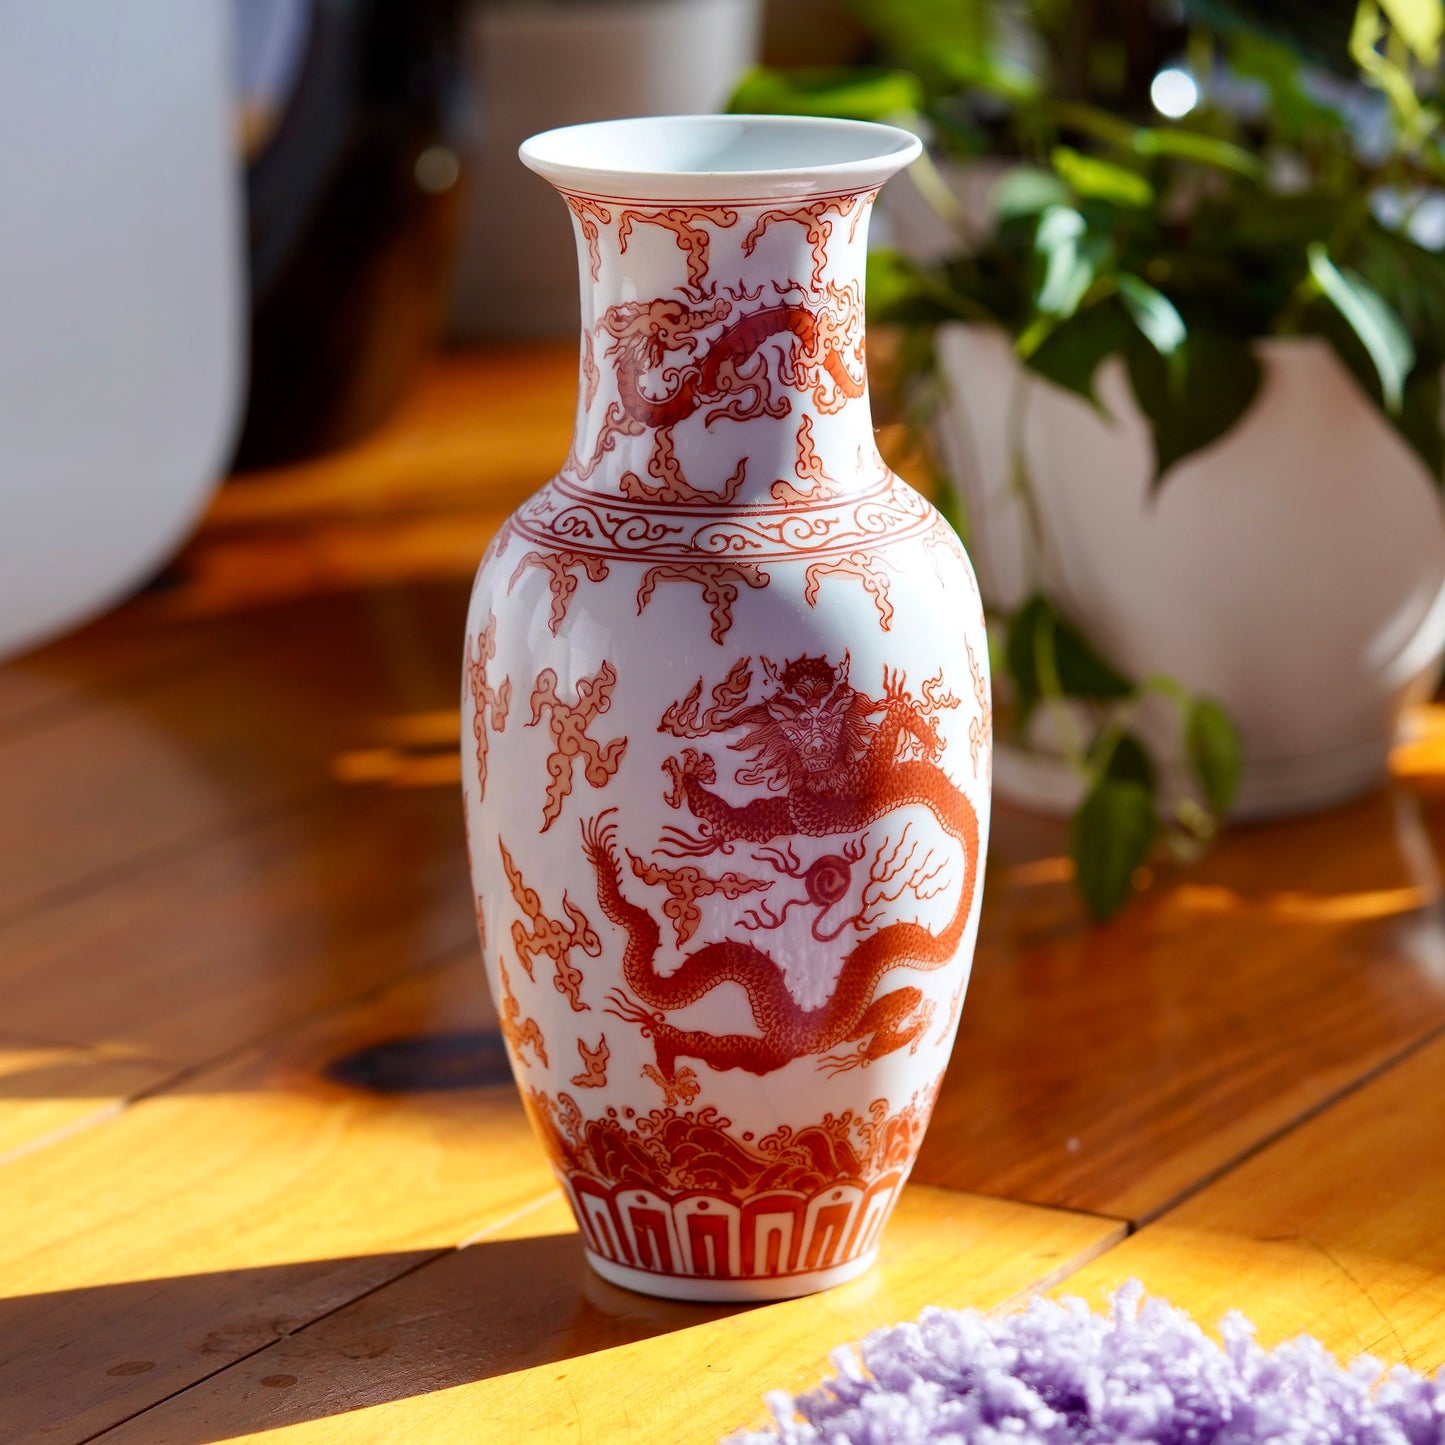 Load image into Gallery viewer, Vintage orange and white hand painted Japanese porcelain vase with  dragons, displayed on wood floor with potted plant in background
